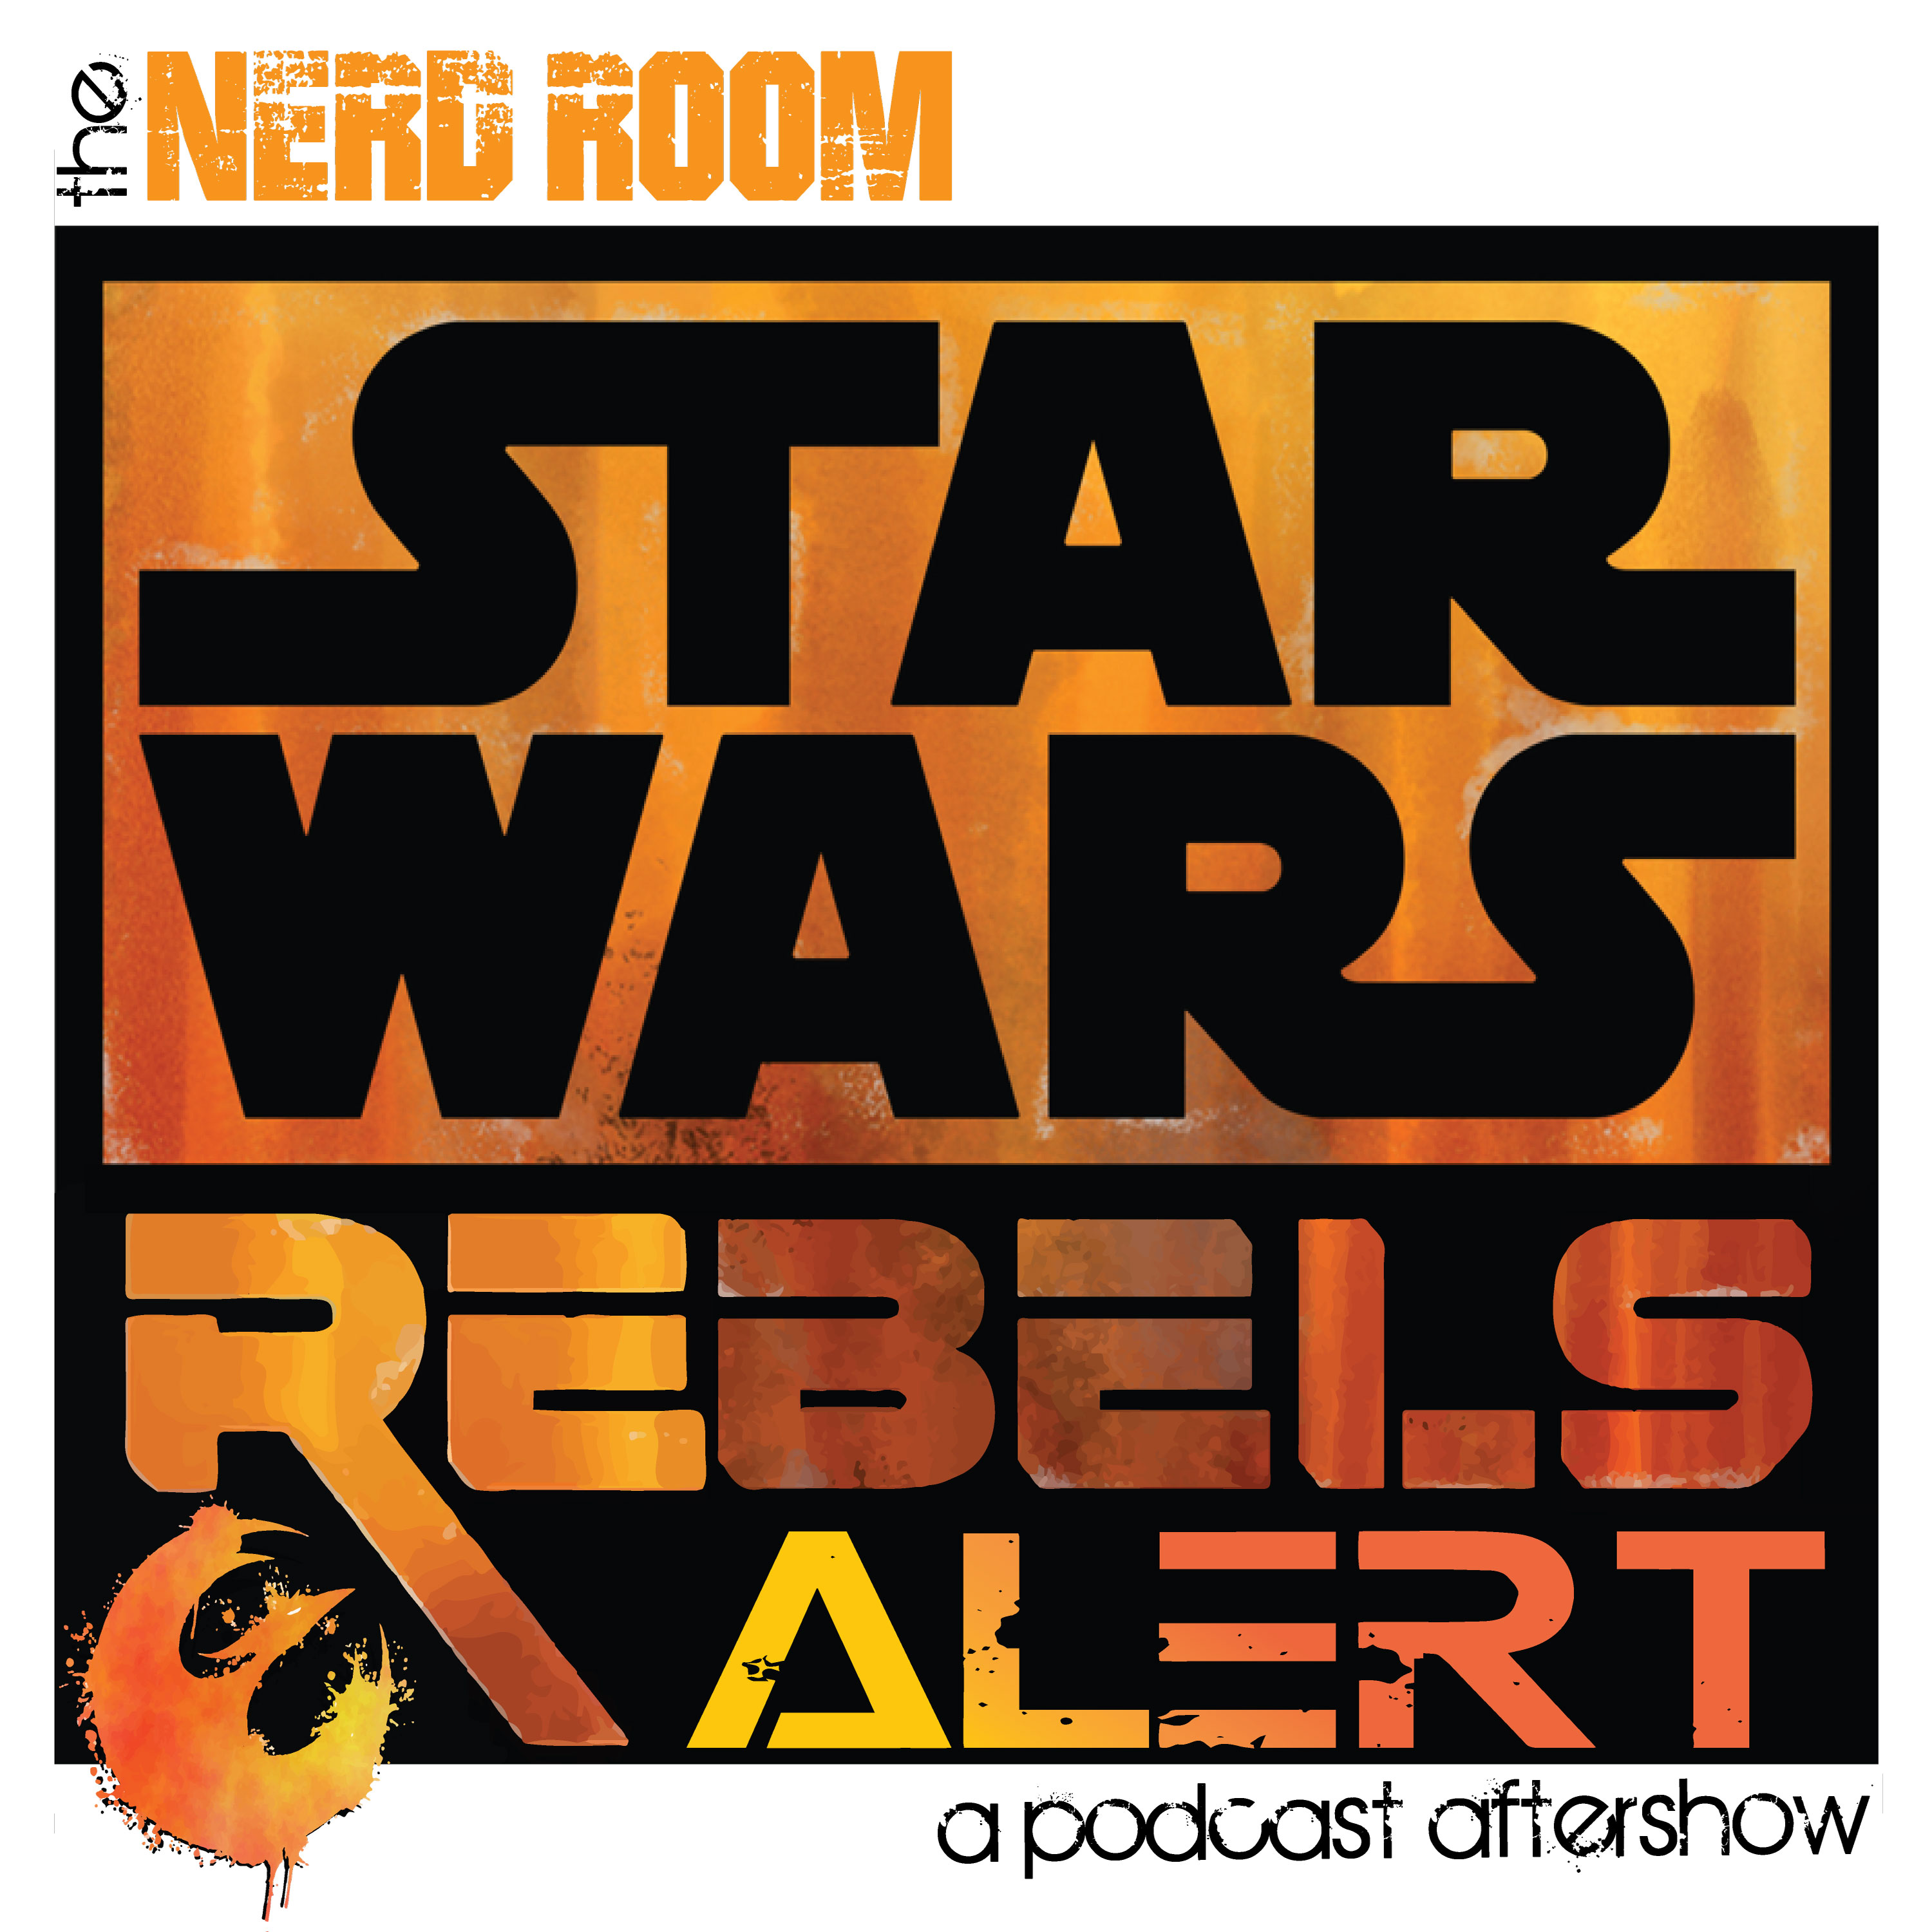 SW Rebels Aftershow: 'Heroes of Mandalore' & 'In the Name of the Rebellion'